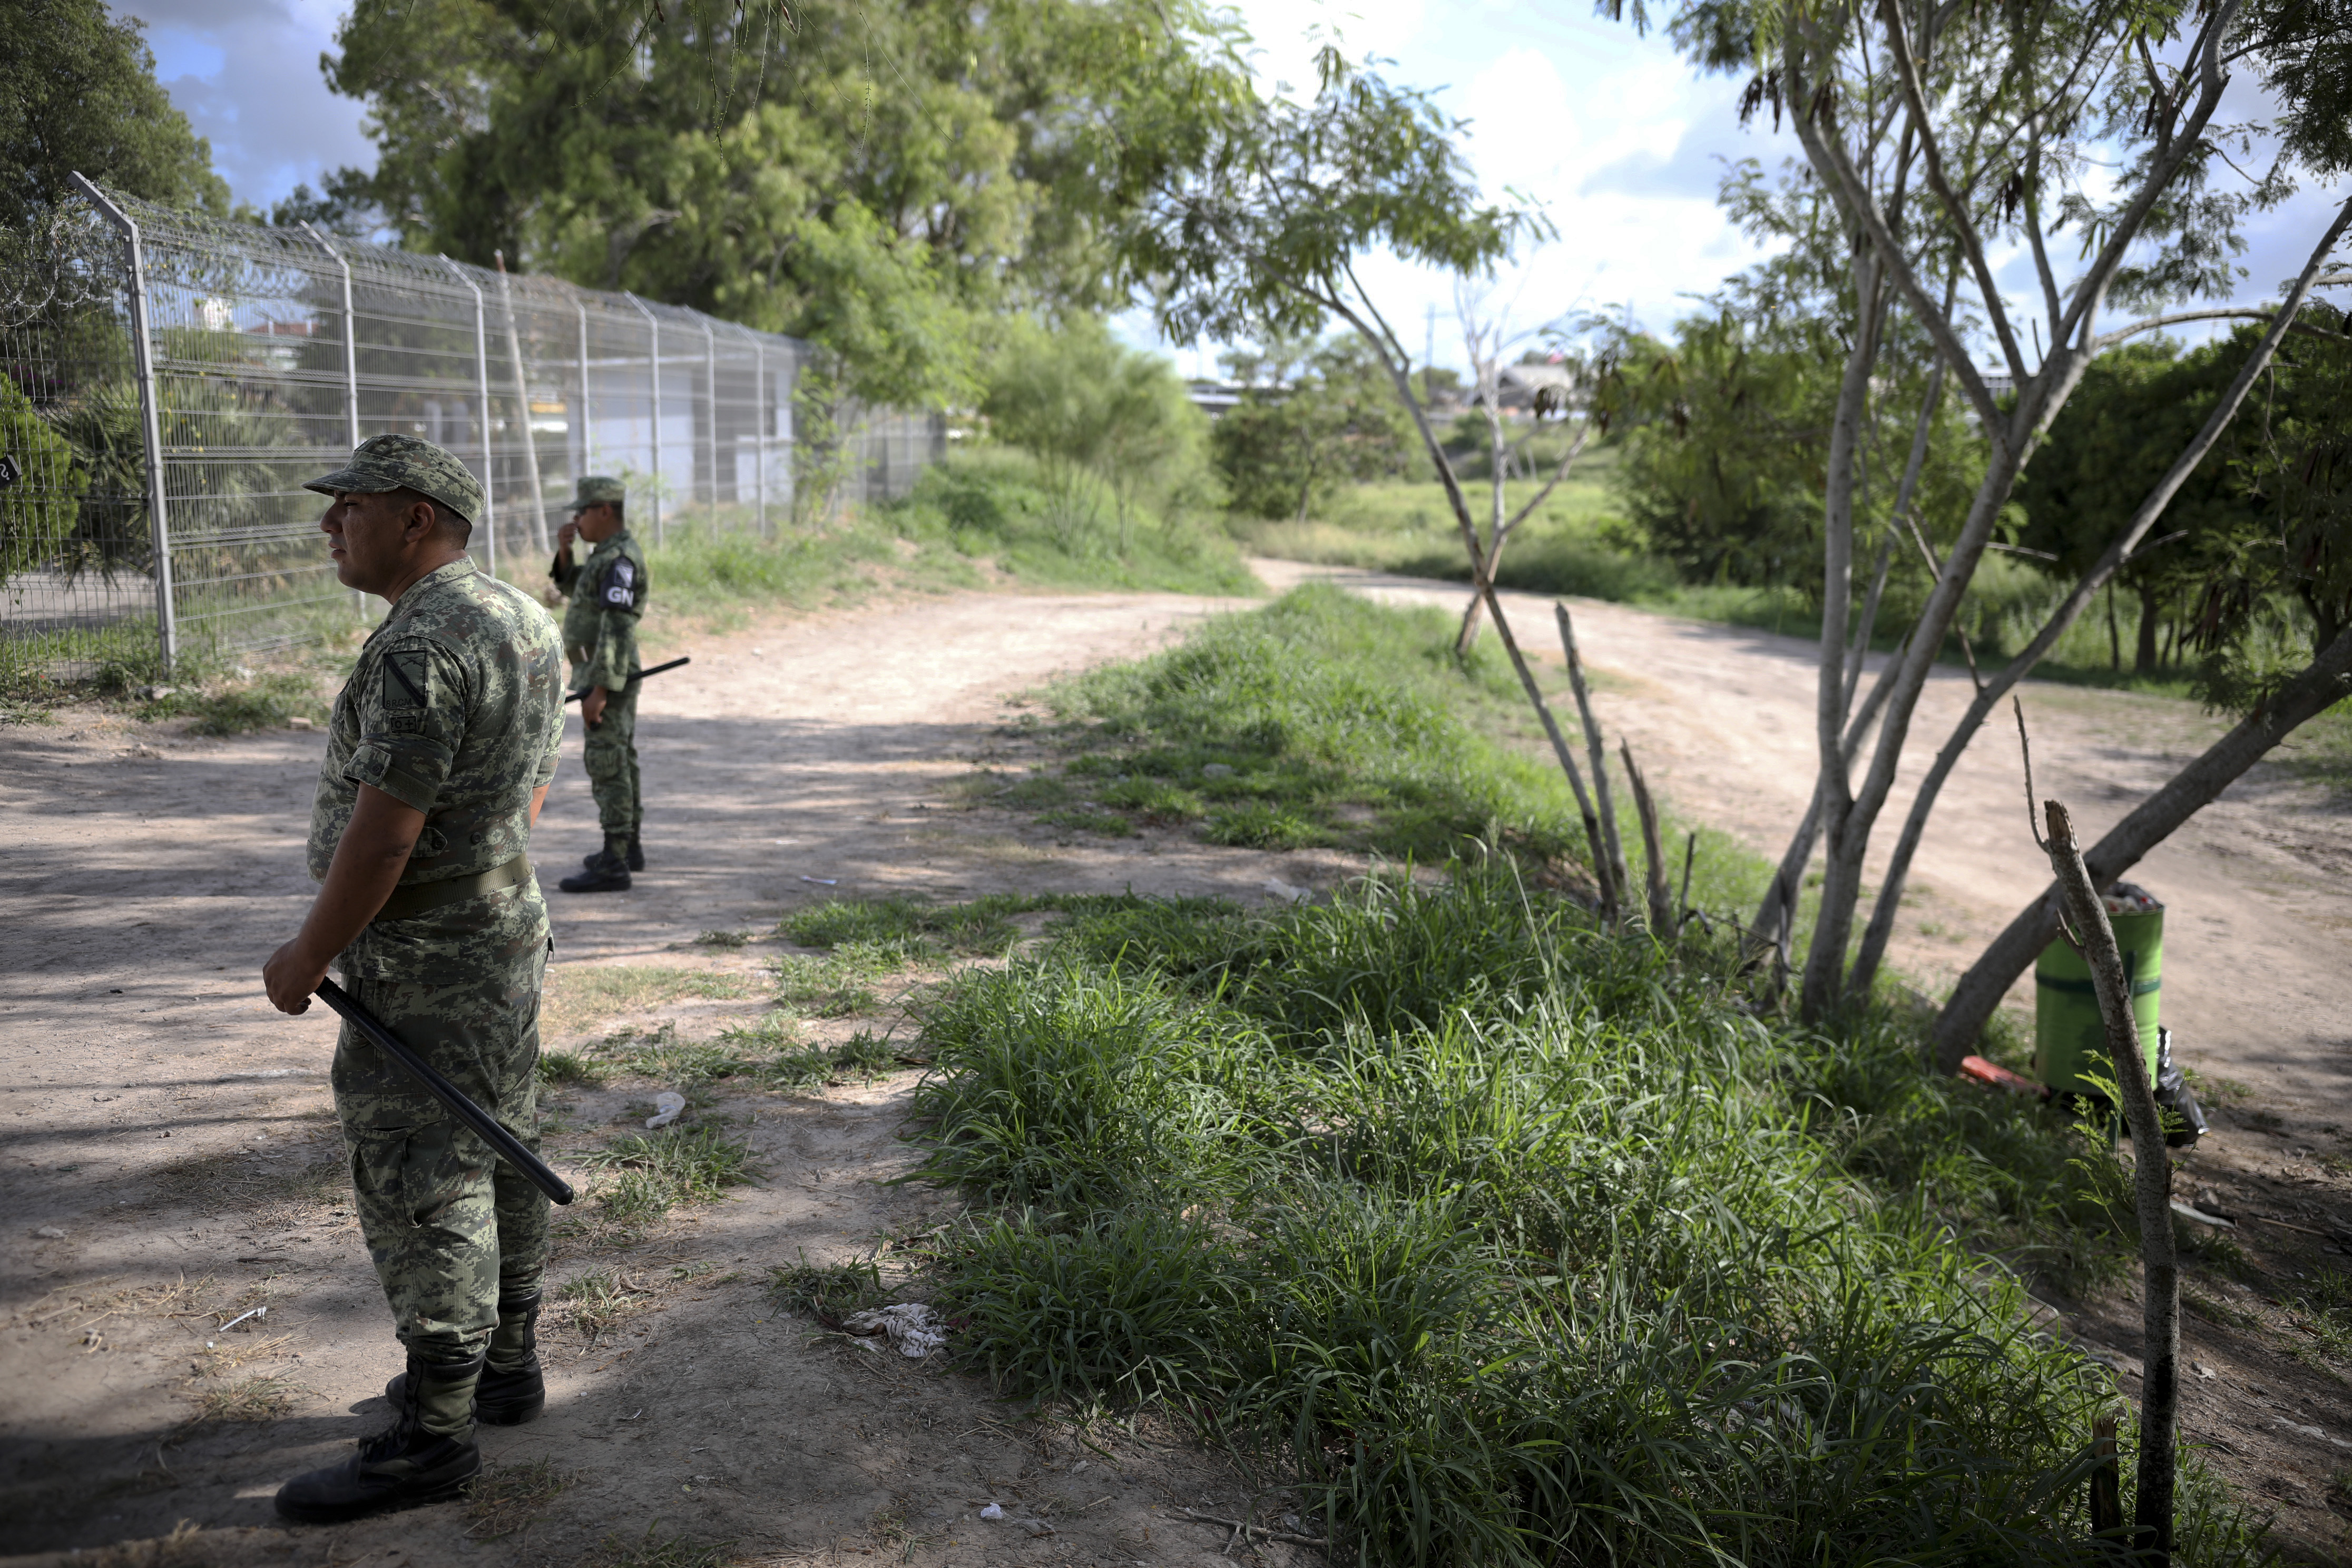 Military police wearing the insignia of the National Guard patrol near the border bridge that crosses the Rio Grande river in Matamoros, Mexico, Thursday, Aug. 1, 2019, on the border with Brownsville, Texas. Migrants are being sent back to wait in this Mexican state of Tamaulipas, a place the U.S. State Department warns Americans to avoid all travel due to high levels of violence and kidnapping, under a plan known colloquially as “remain in Mexico.” (AP Photo/Emilio Espejel)